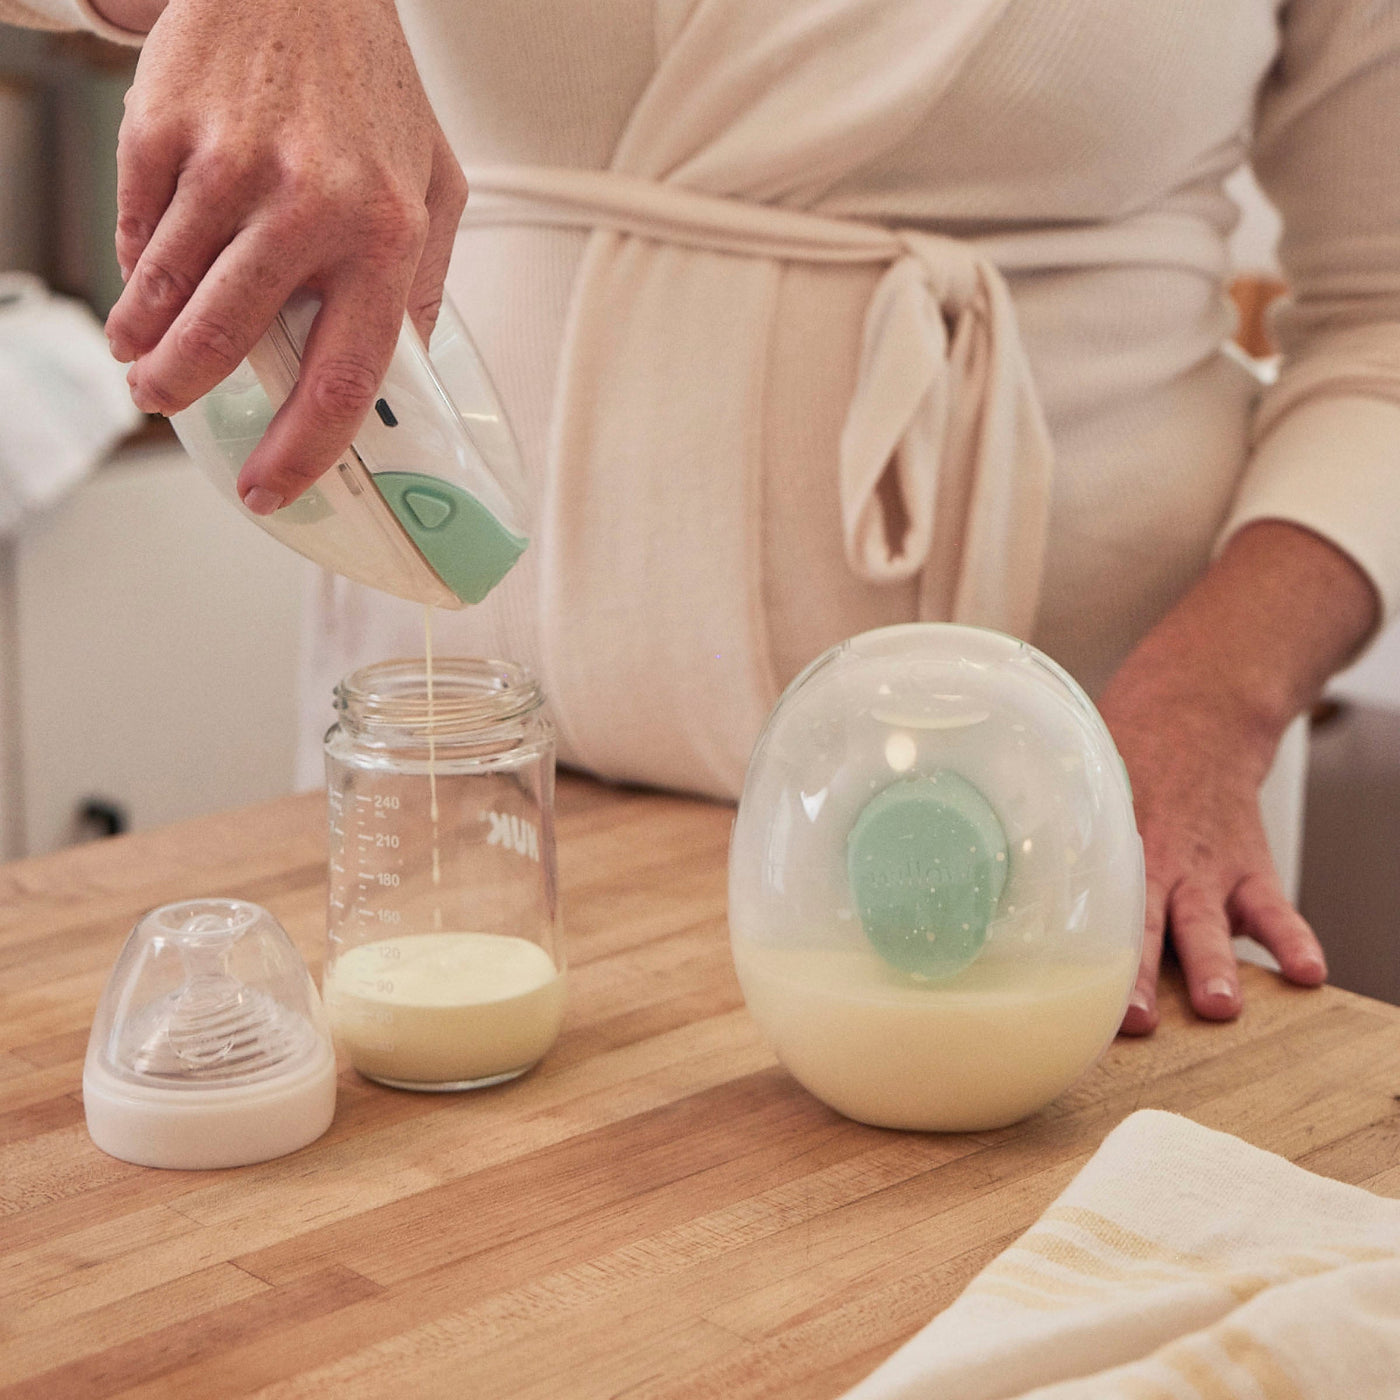 Willow Go Hands-Free Wearable in-bra Double Electric Breast Pump - Clear